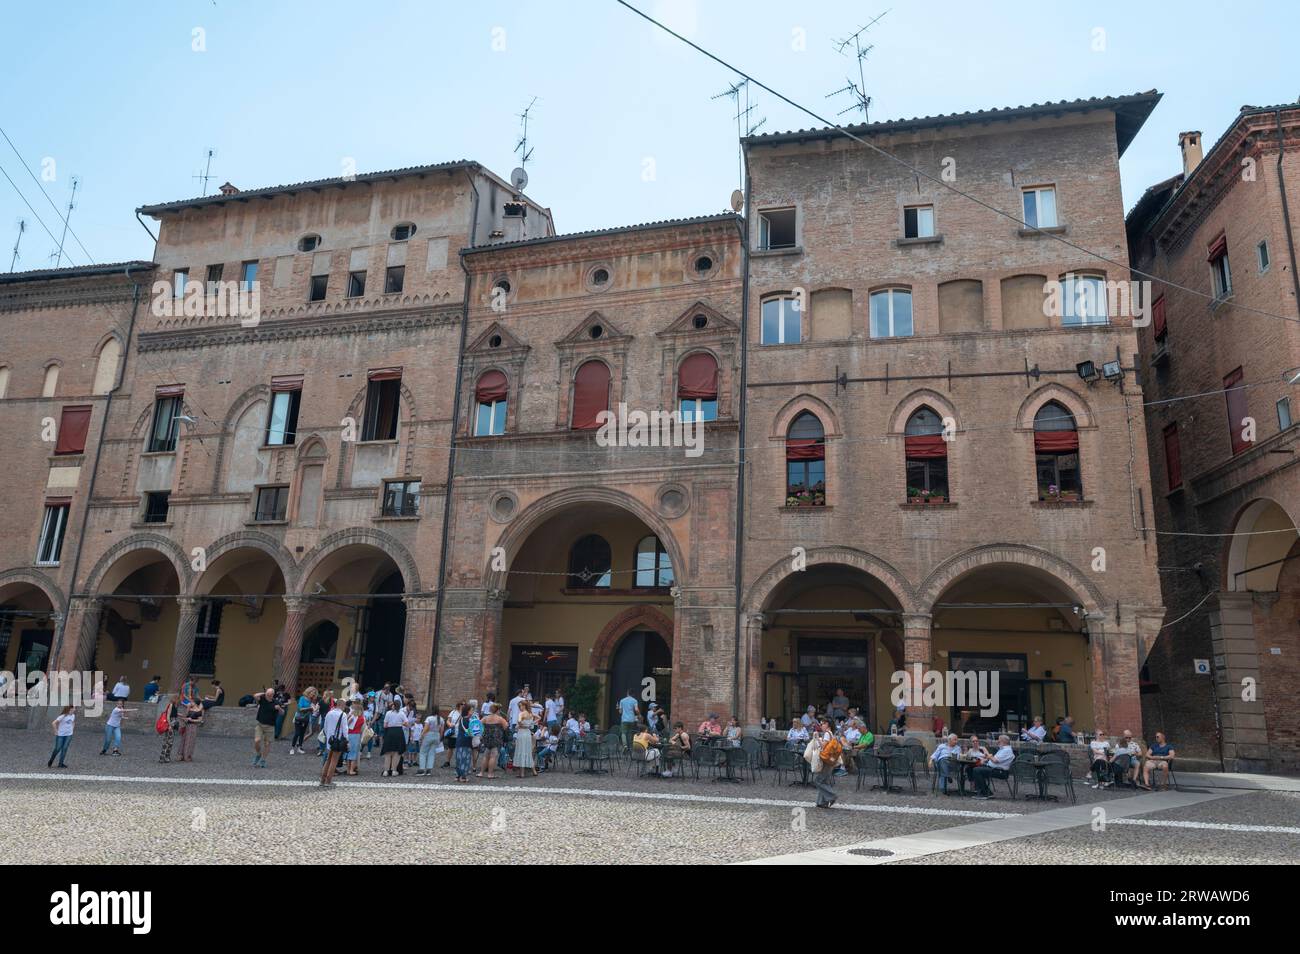 A row of Renaissance buildings with a number of eateries under  the long high ceiling porticos or colonnades with a roof structure supported with larg Stock Photo